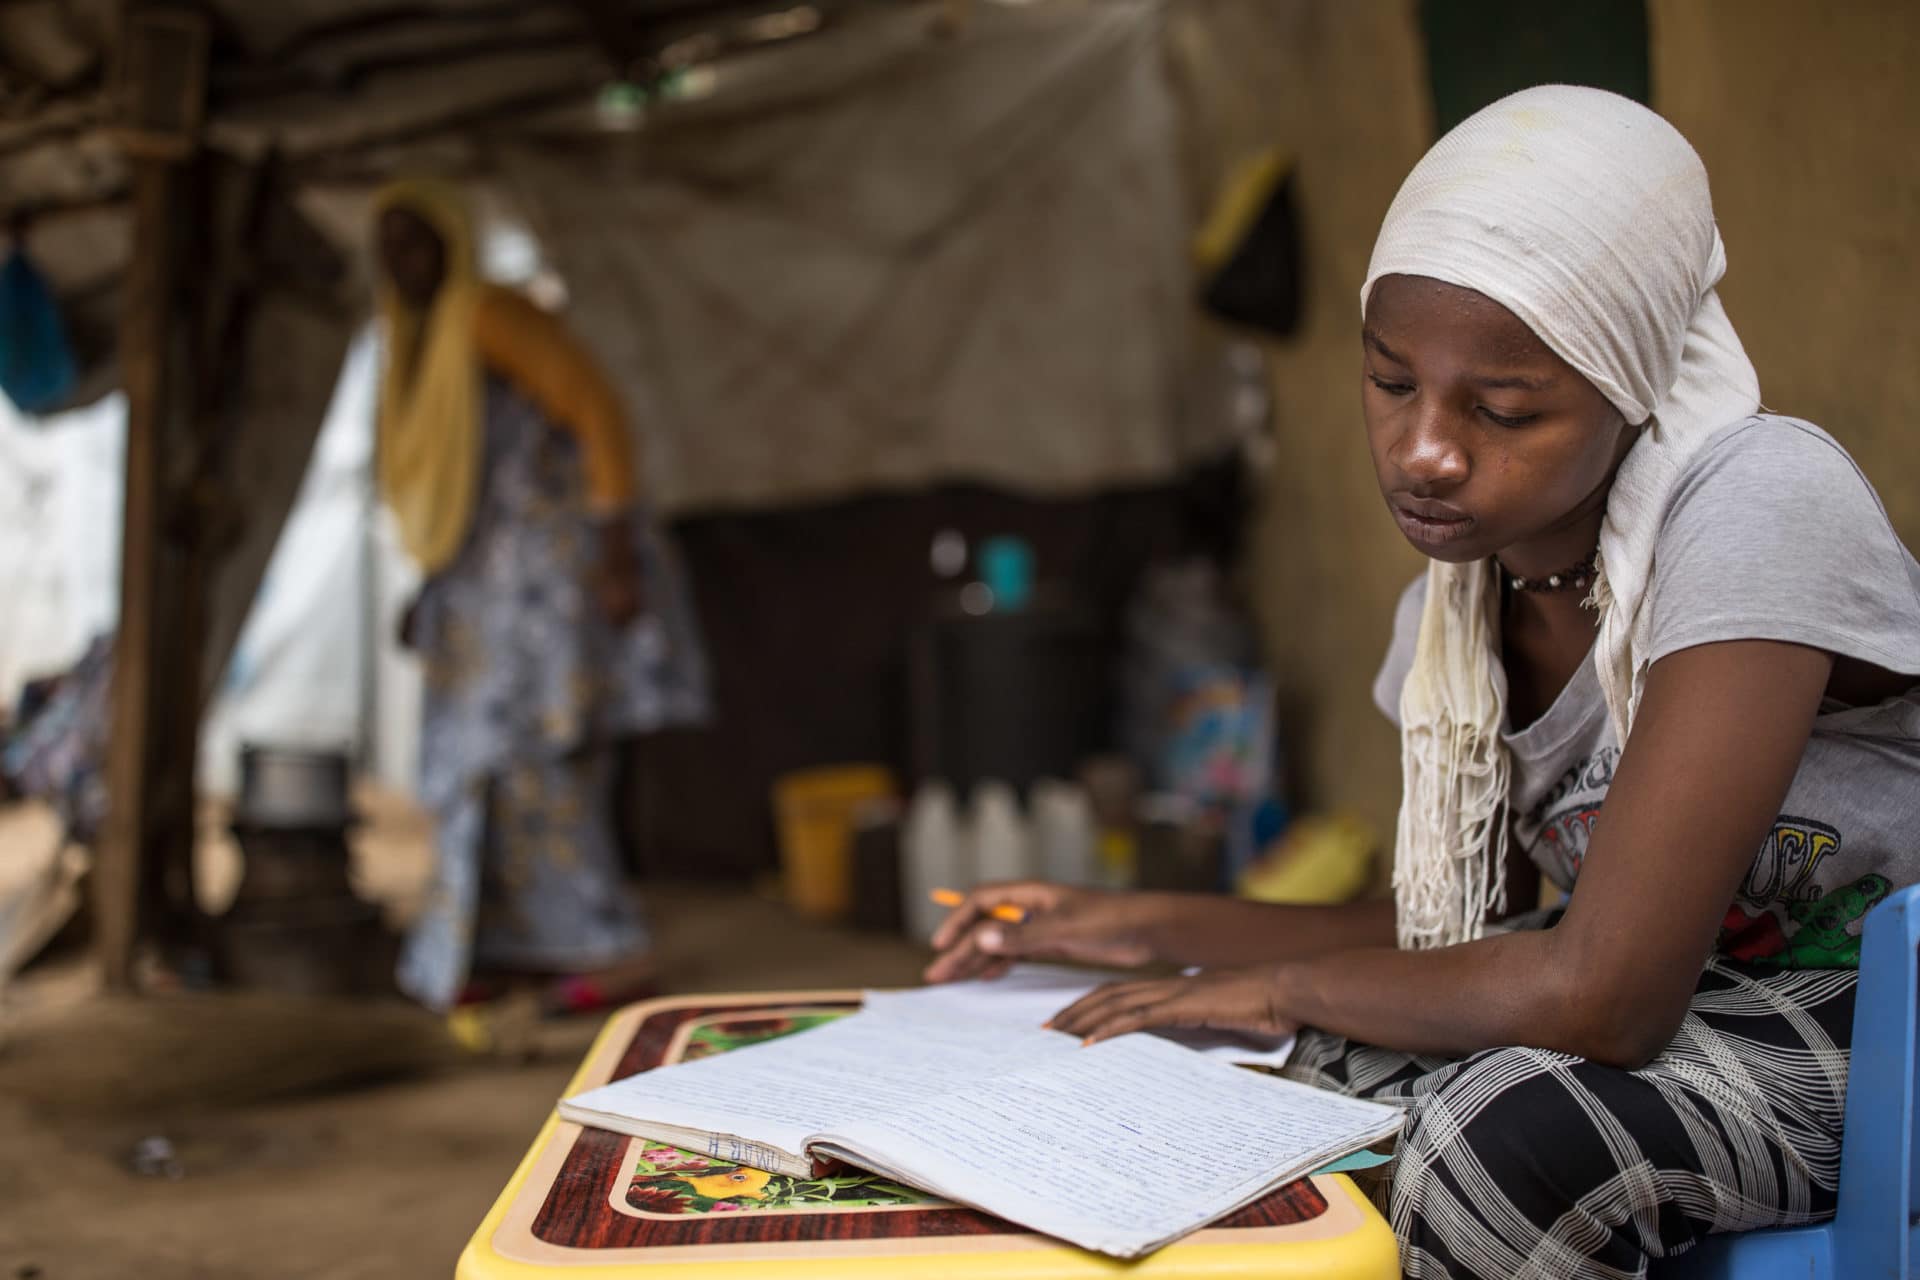 A young refugee student studies at her home